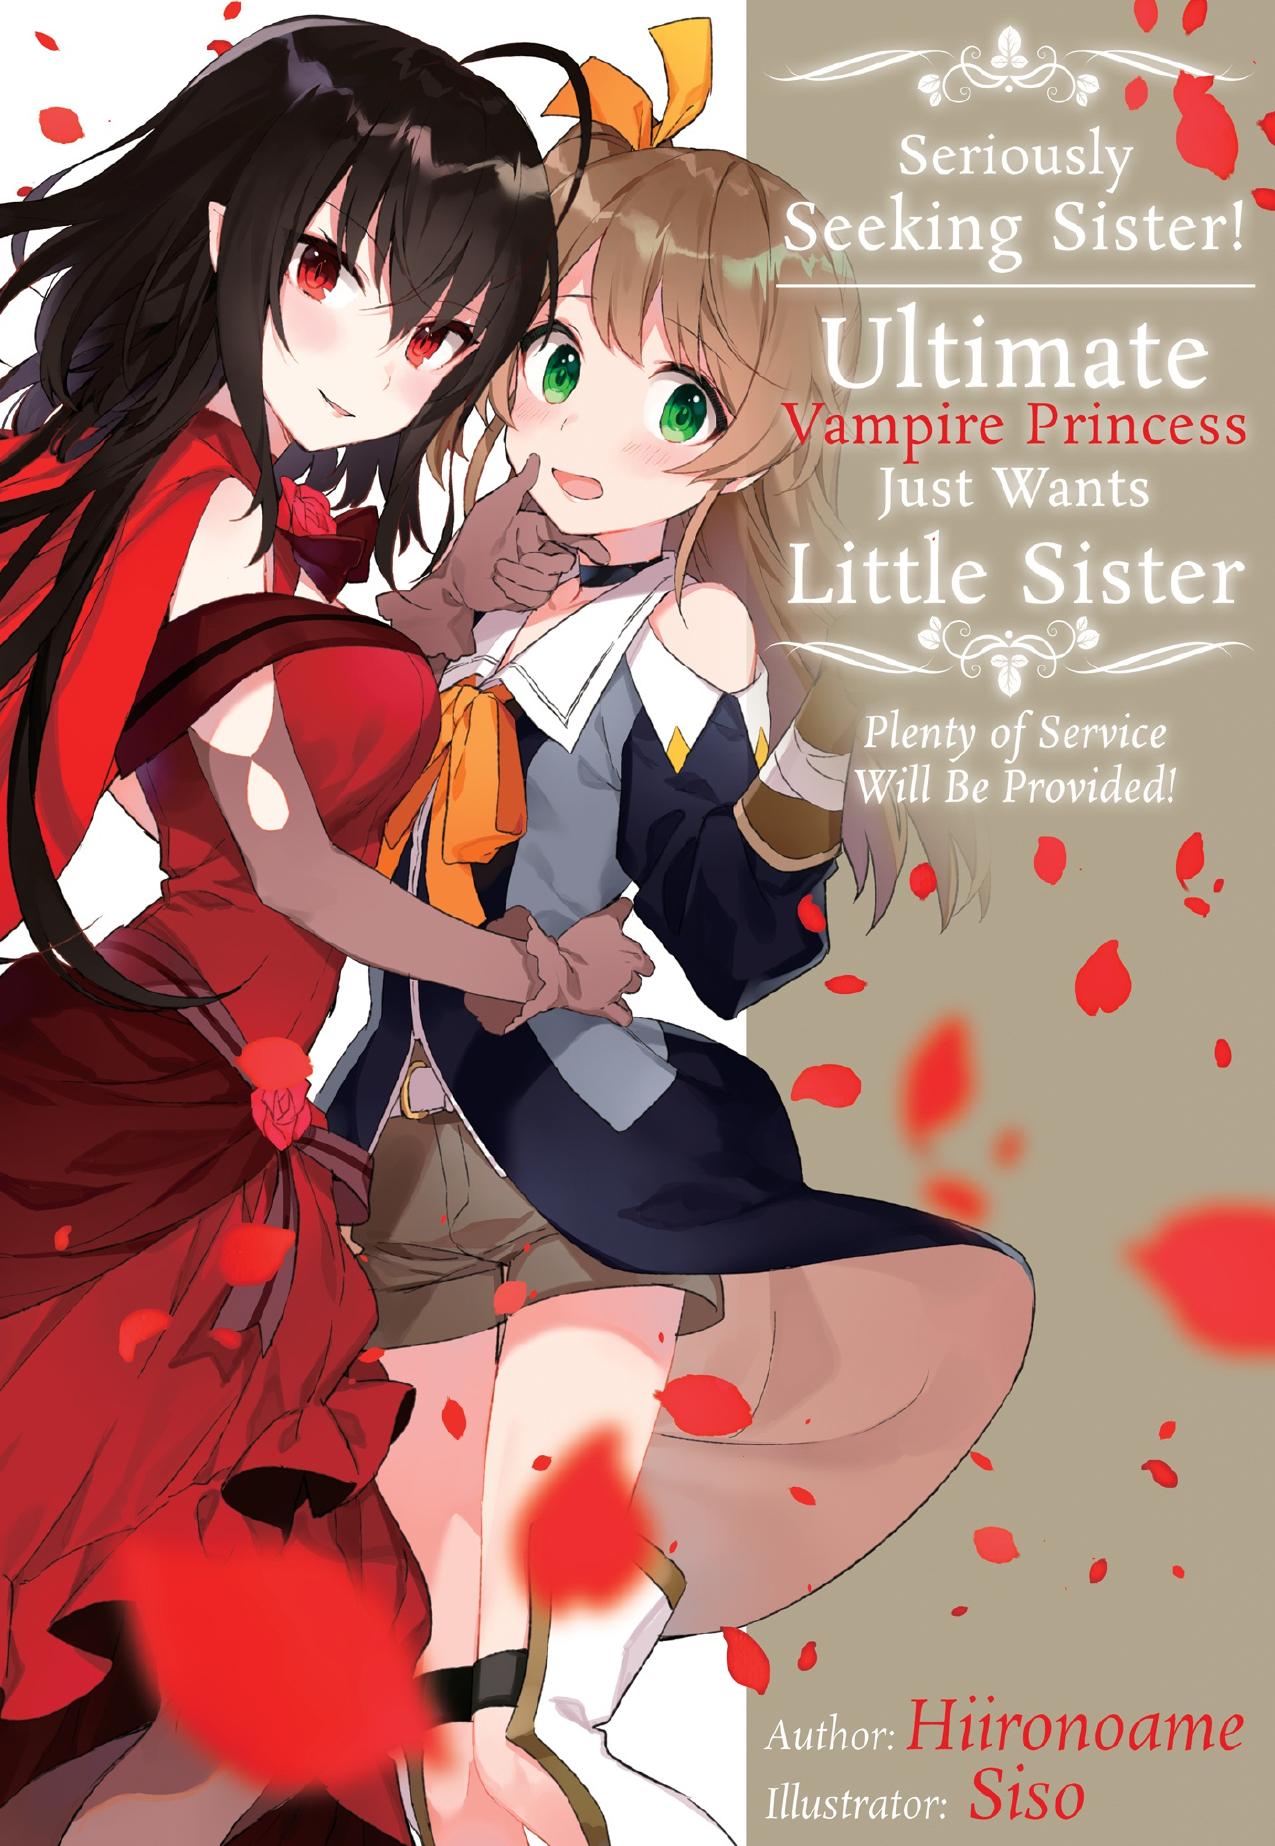 Seriously Seeking Sister! Ultimate Vampire Princess Just Wants Little Sister; Plenty of Service Will Be Provided! by Hiironoame